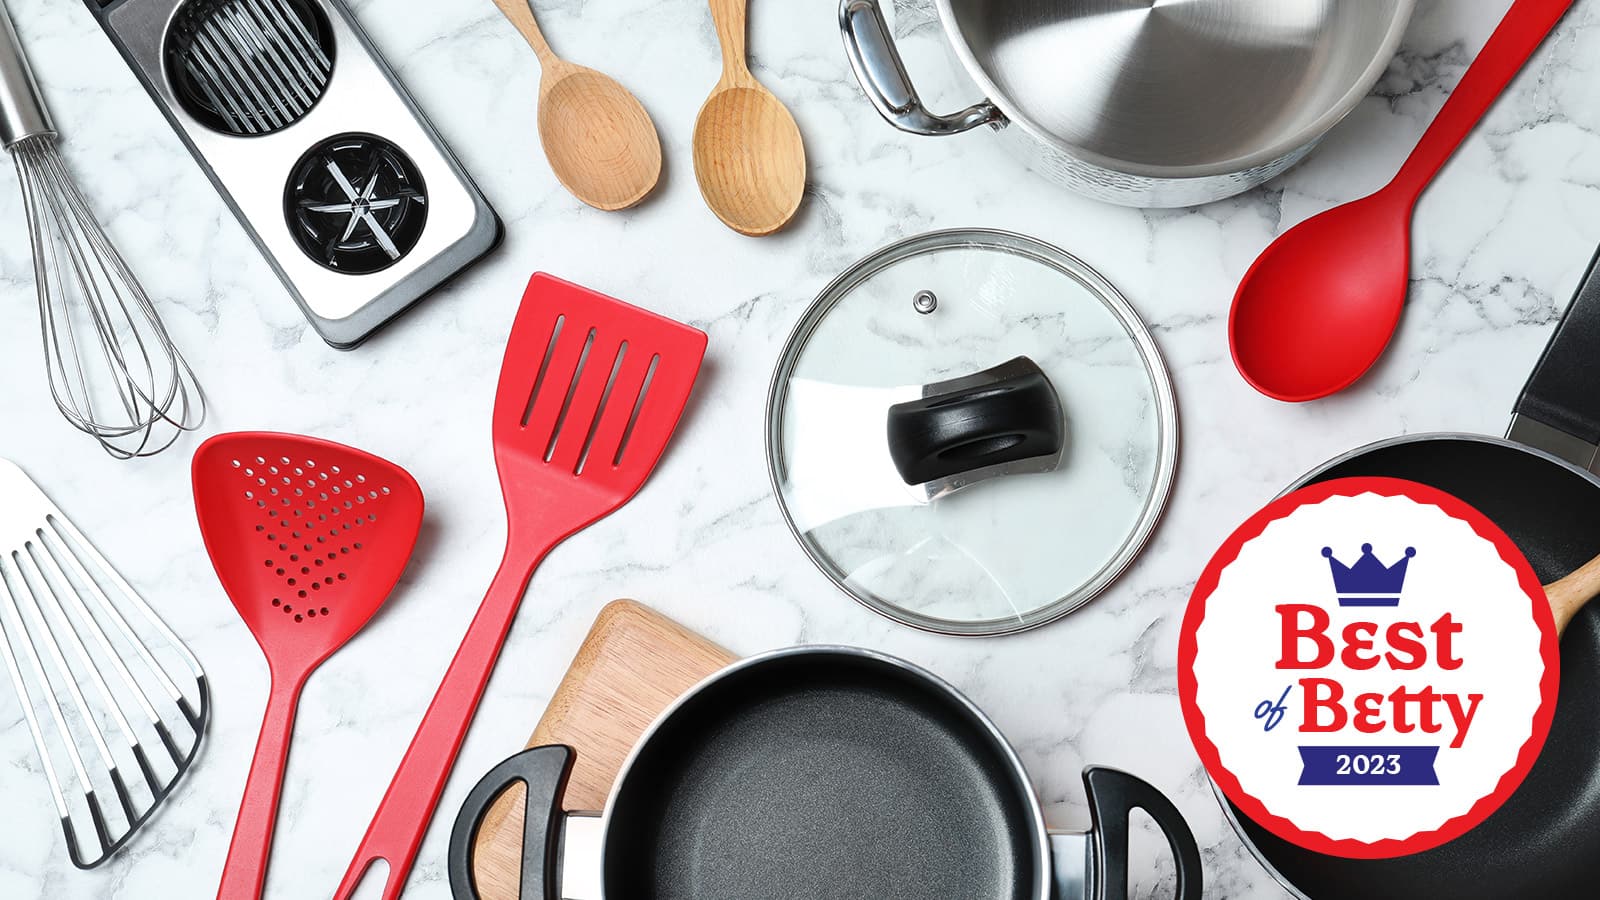 The Best Cooking and Kitchen Equipment for 2023